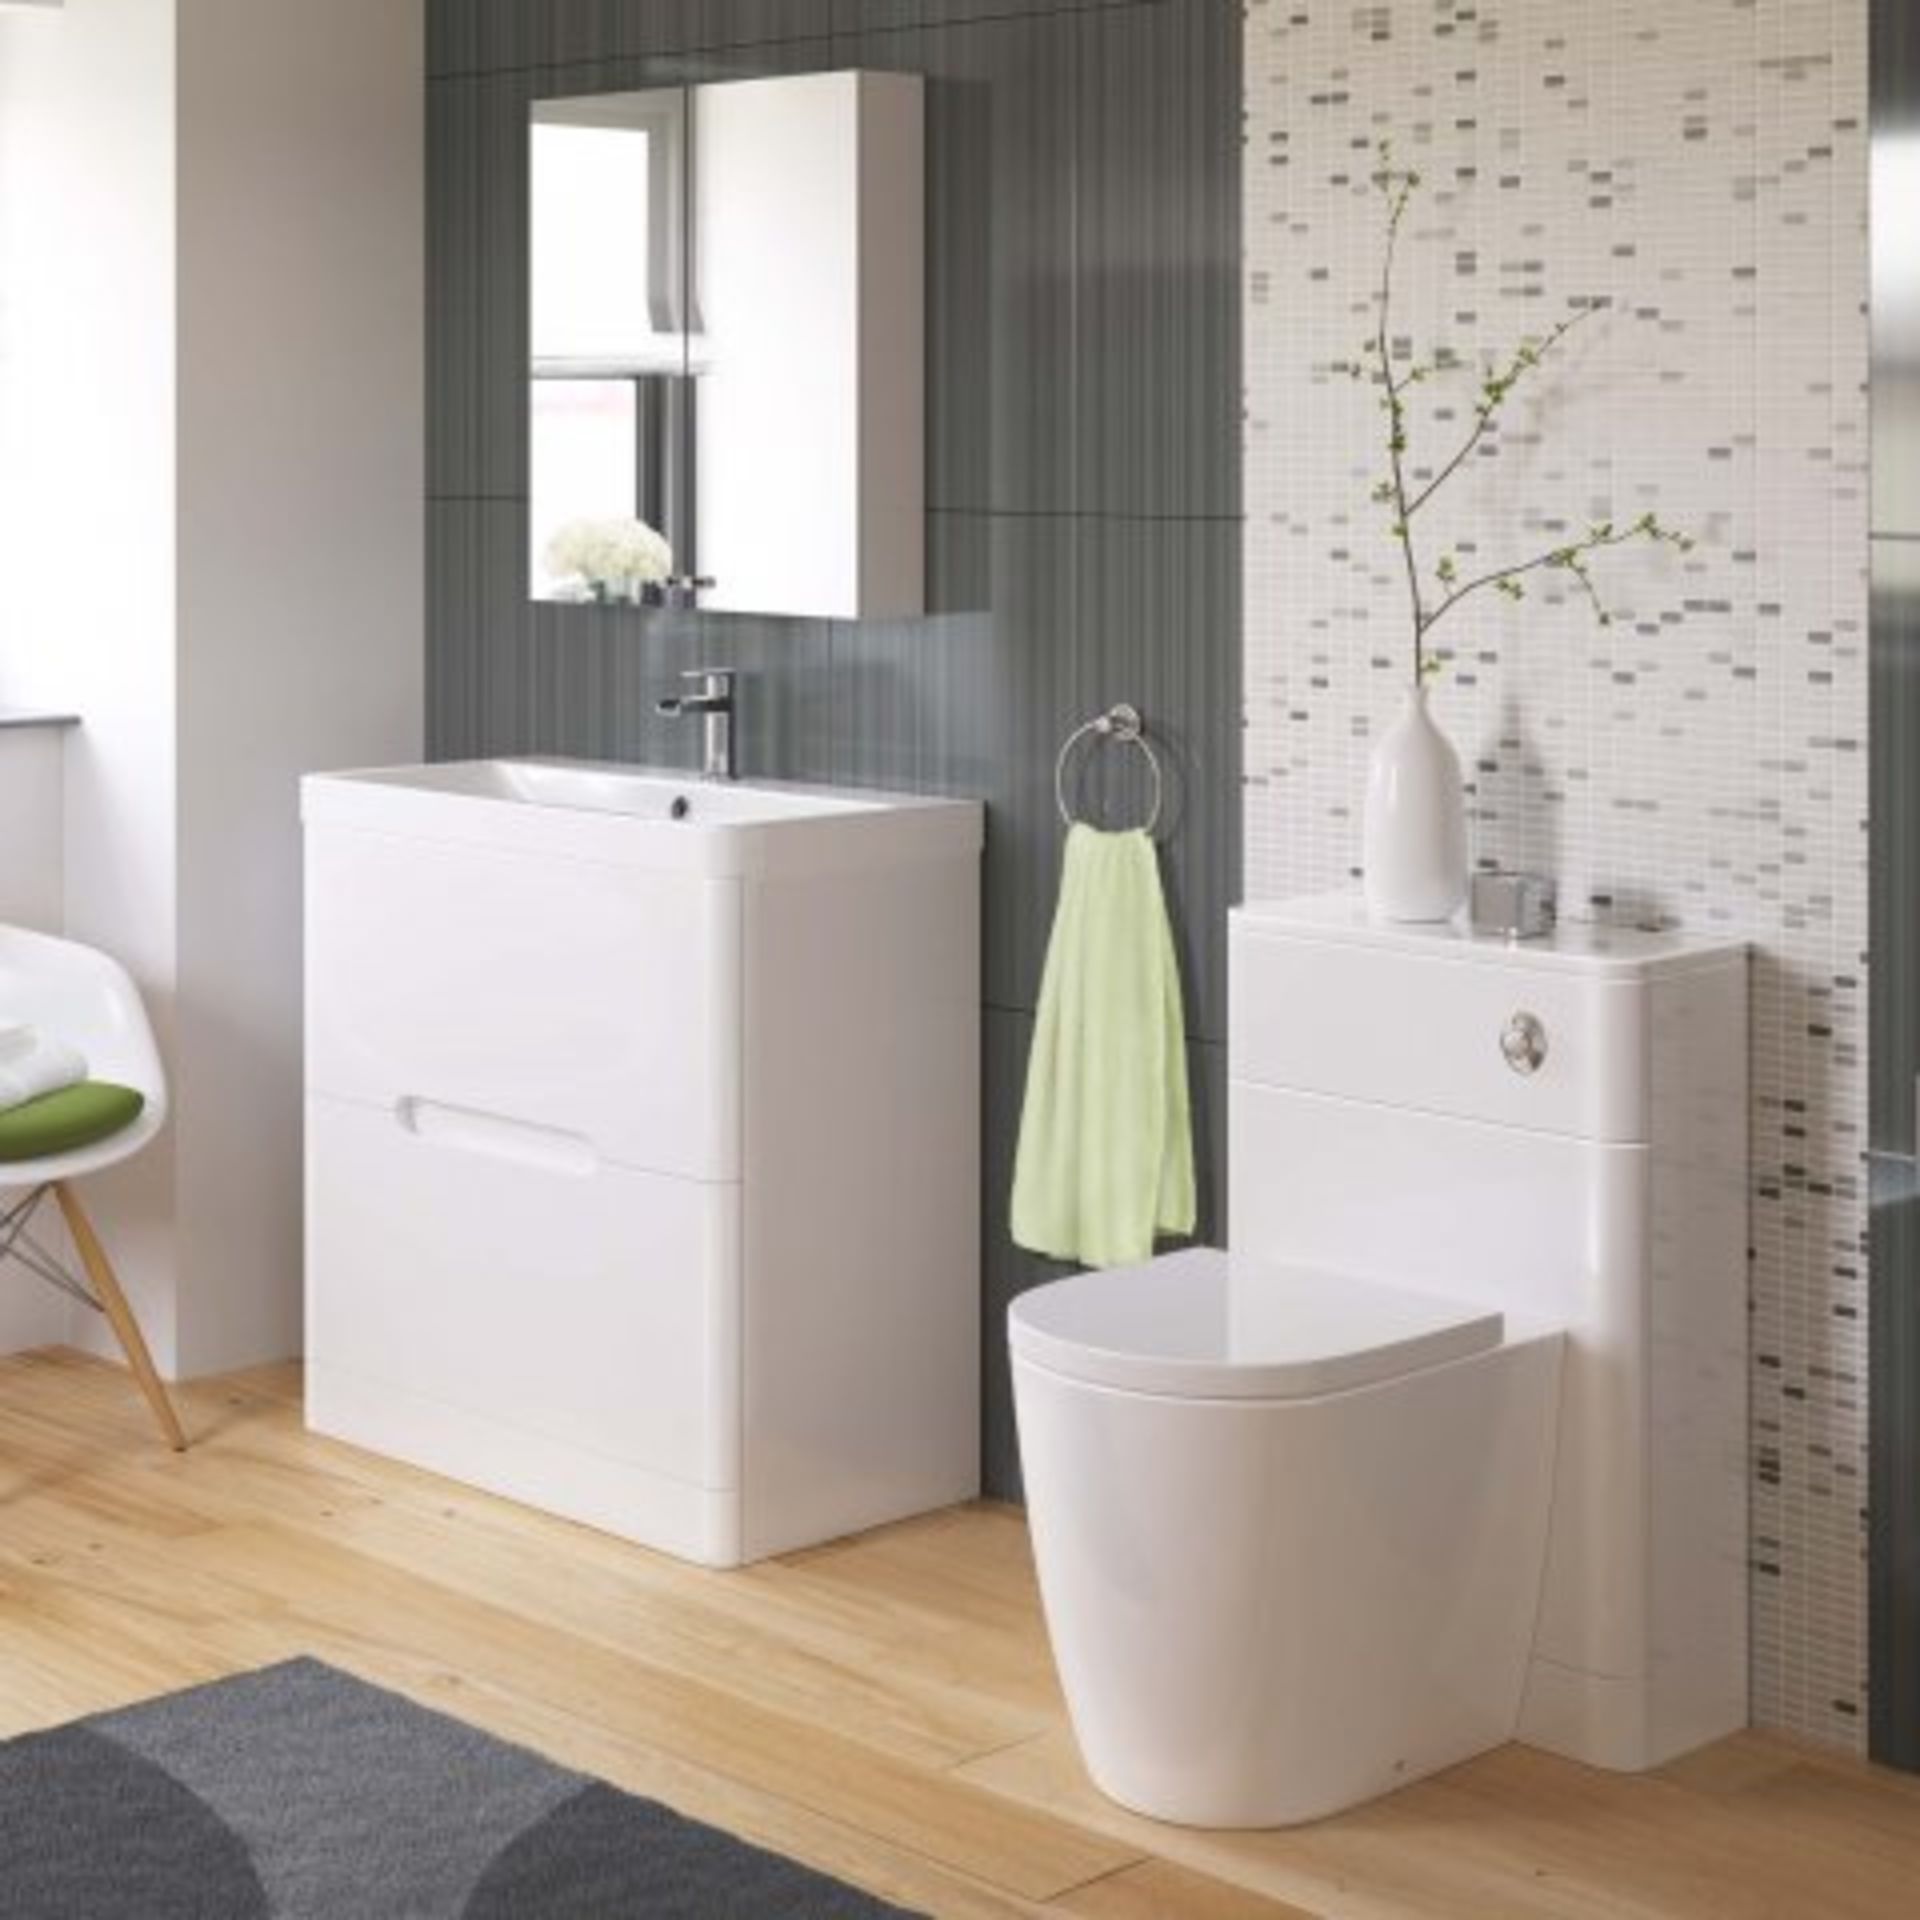 (J40) 800mm Tuscany Gloss White Built In Basin Double Drawer Unit - Floor Standing. RRP £724.99 - Image 2 of 5